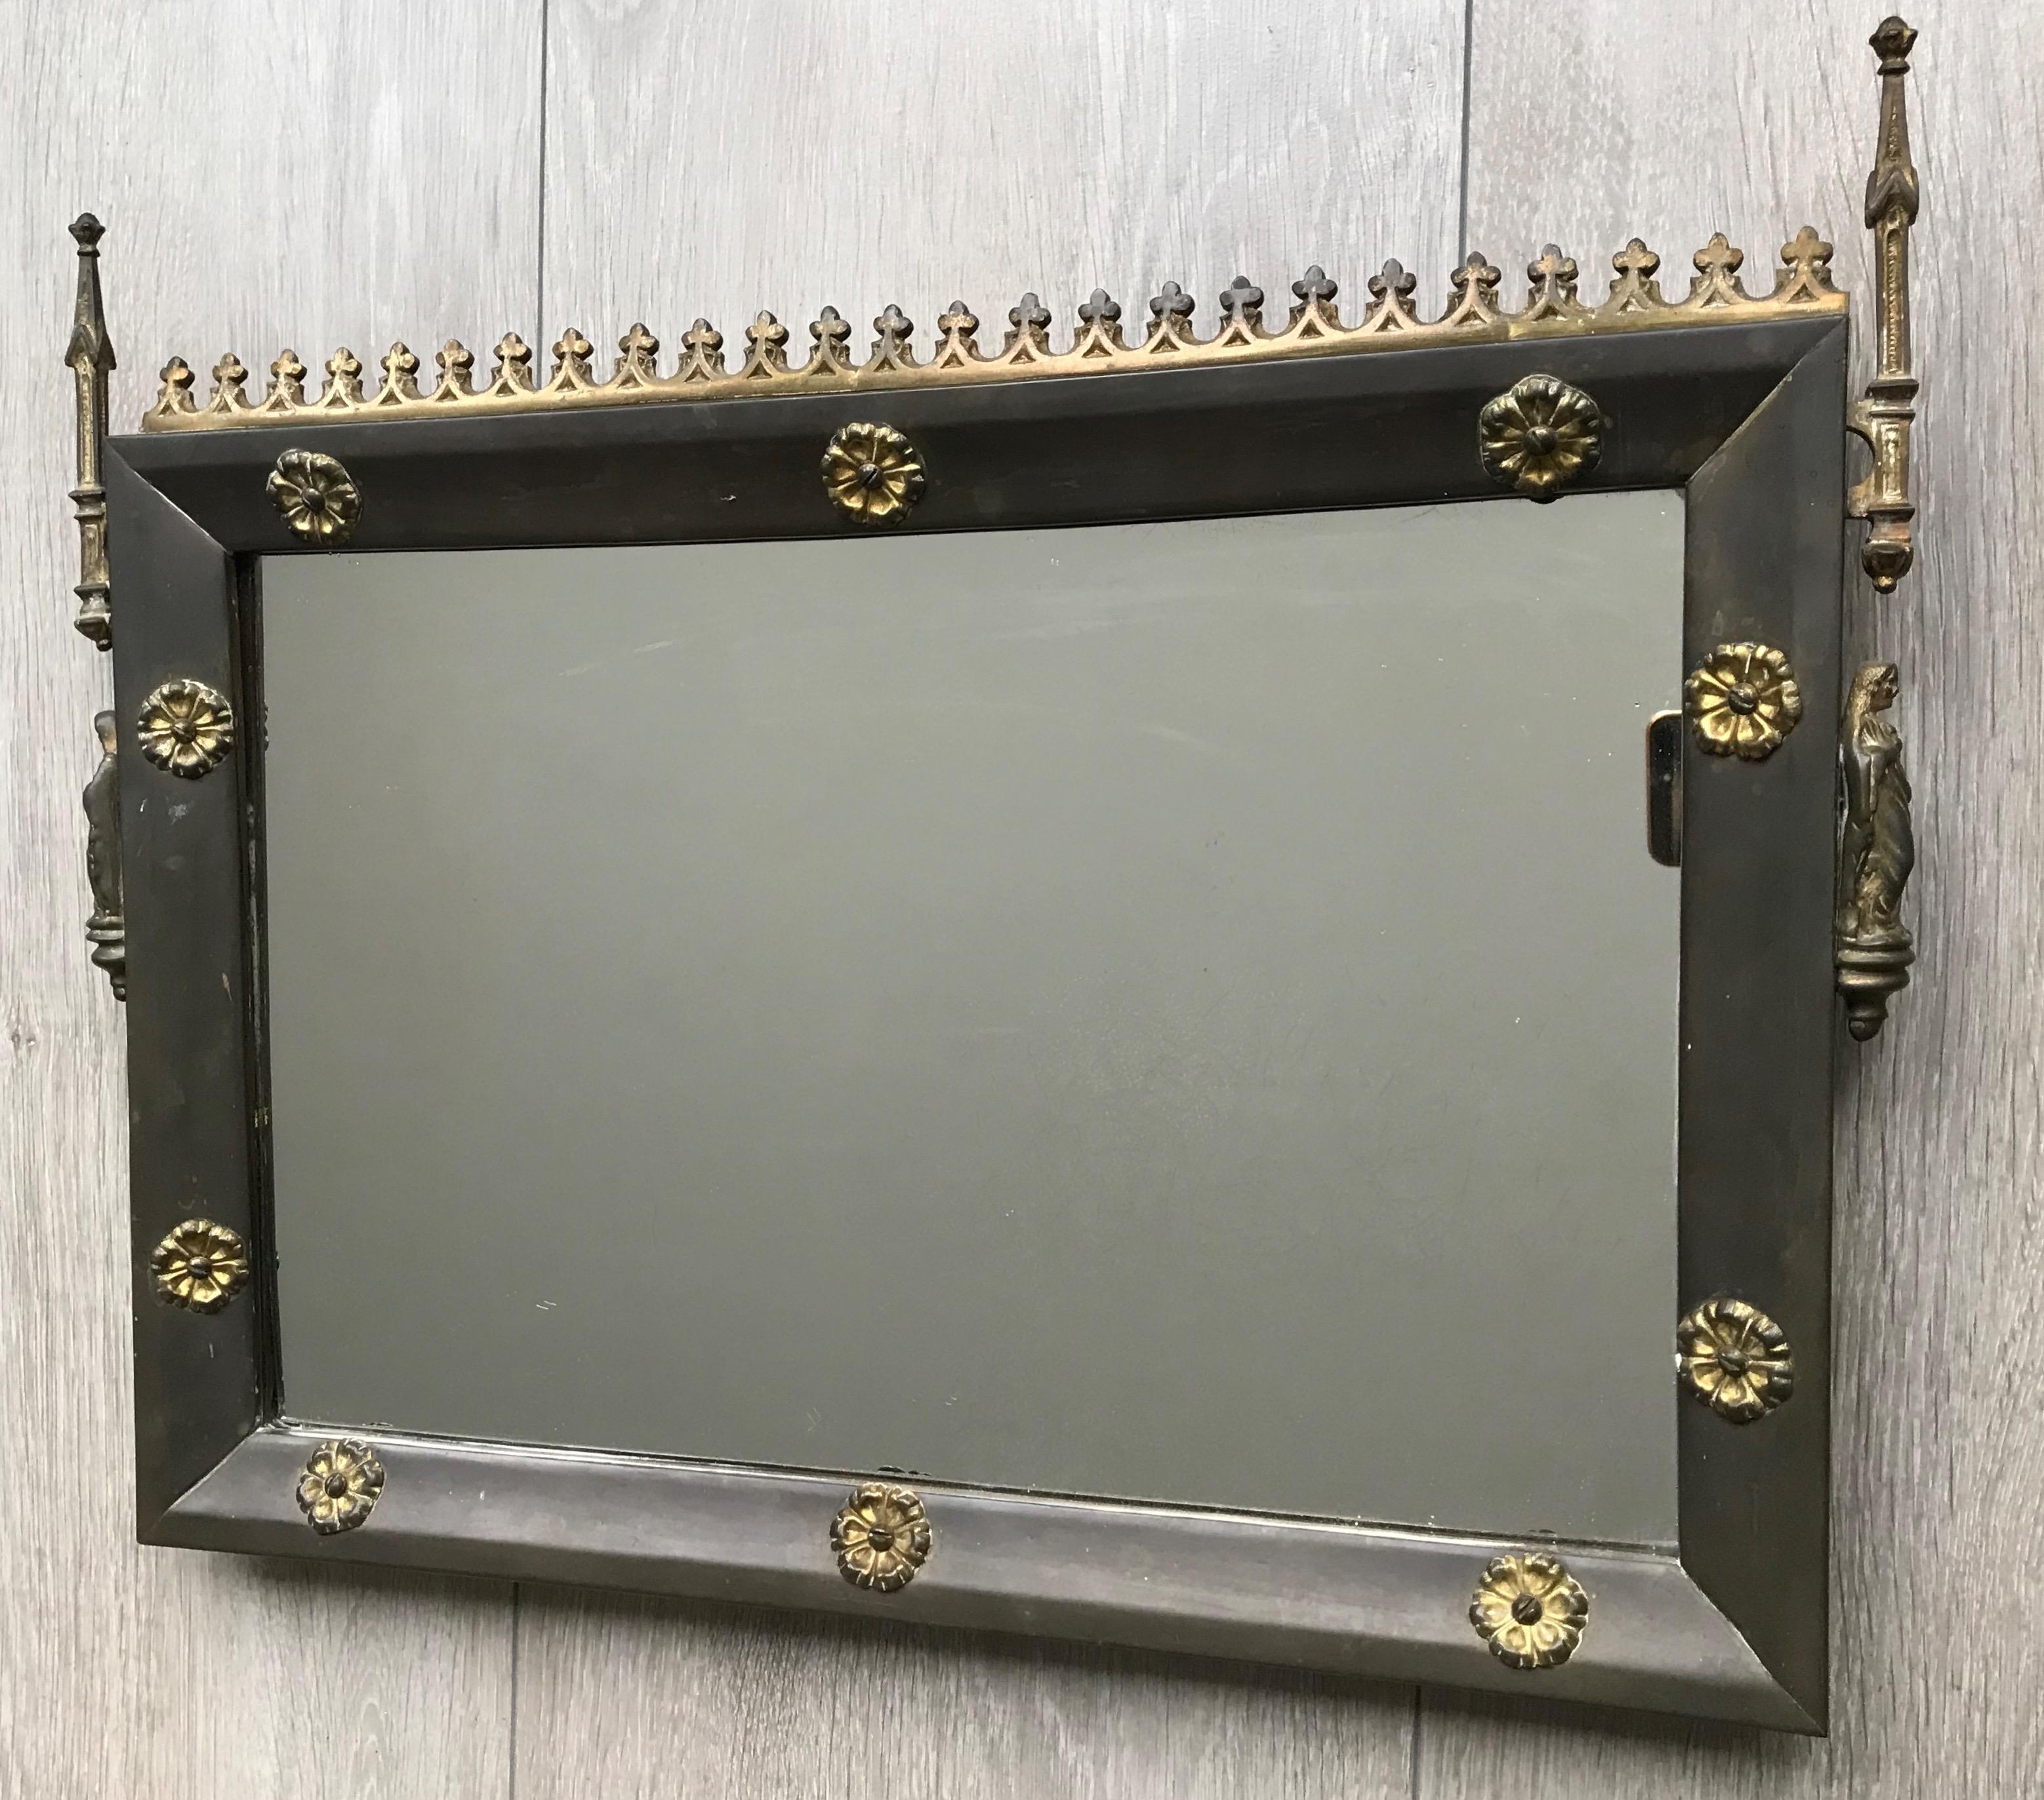 20th Century Antique Brass & Gilt Bronze Gothic Revival Wall Mirror with Holy Mary Sculptures